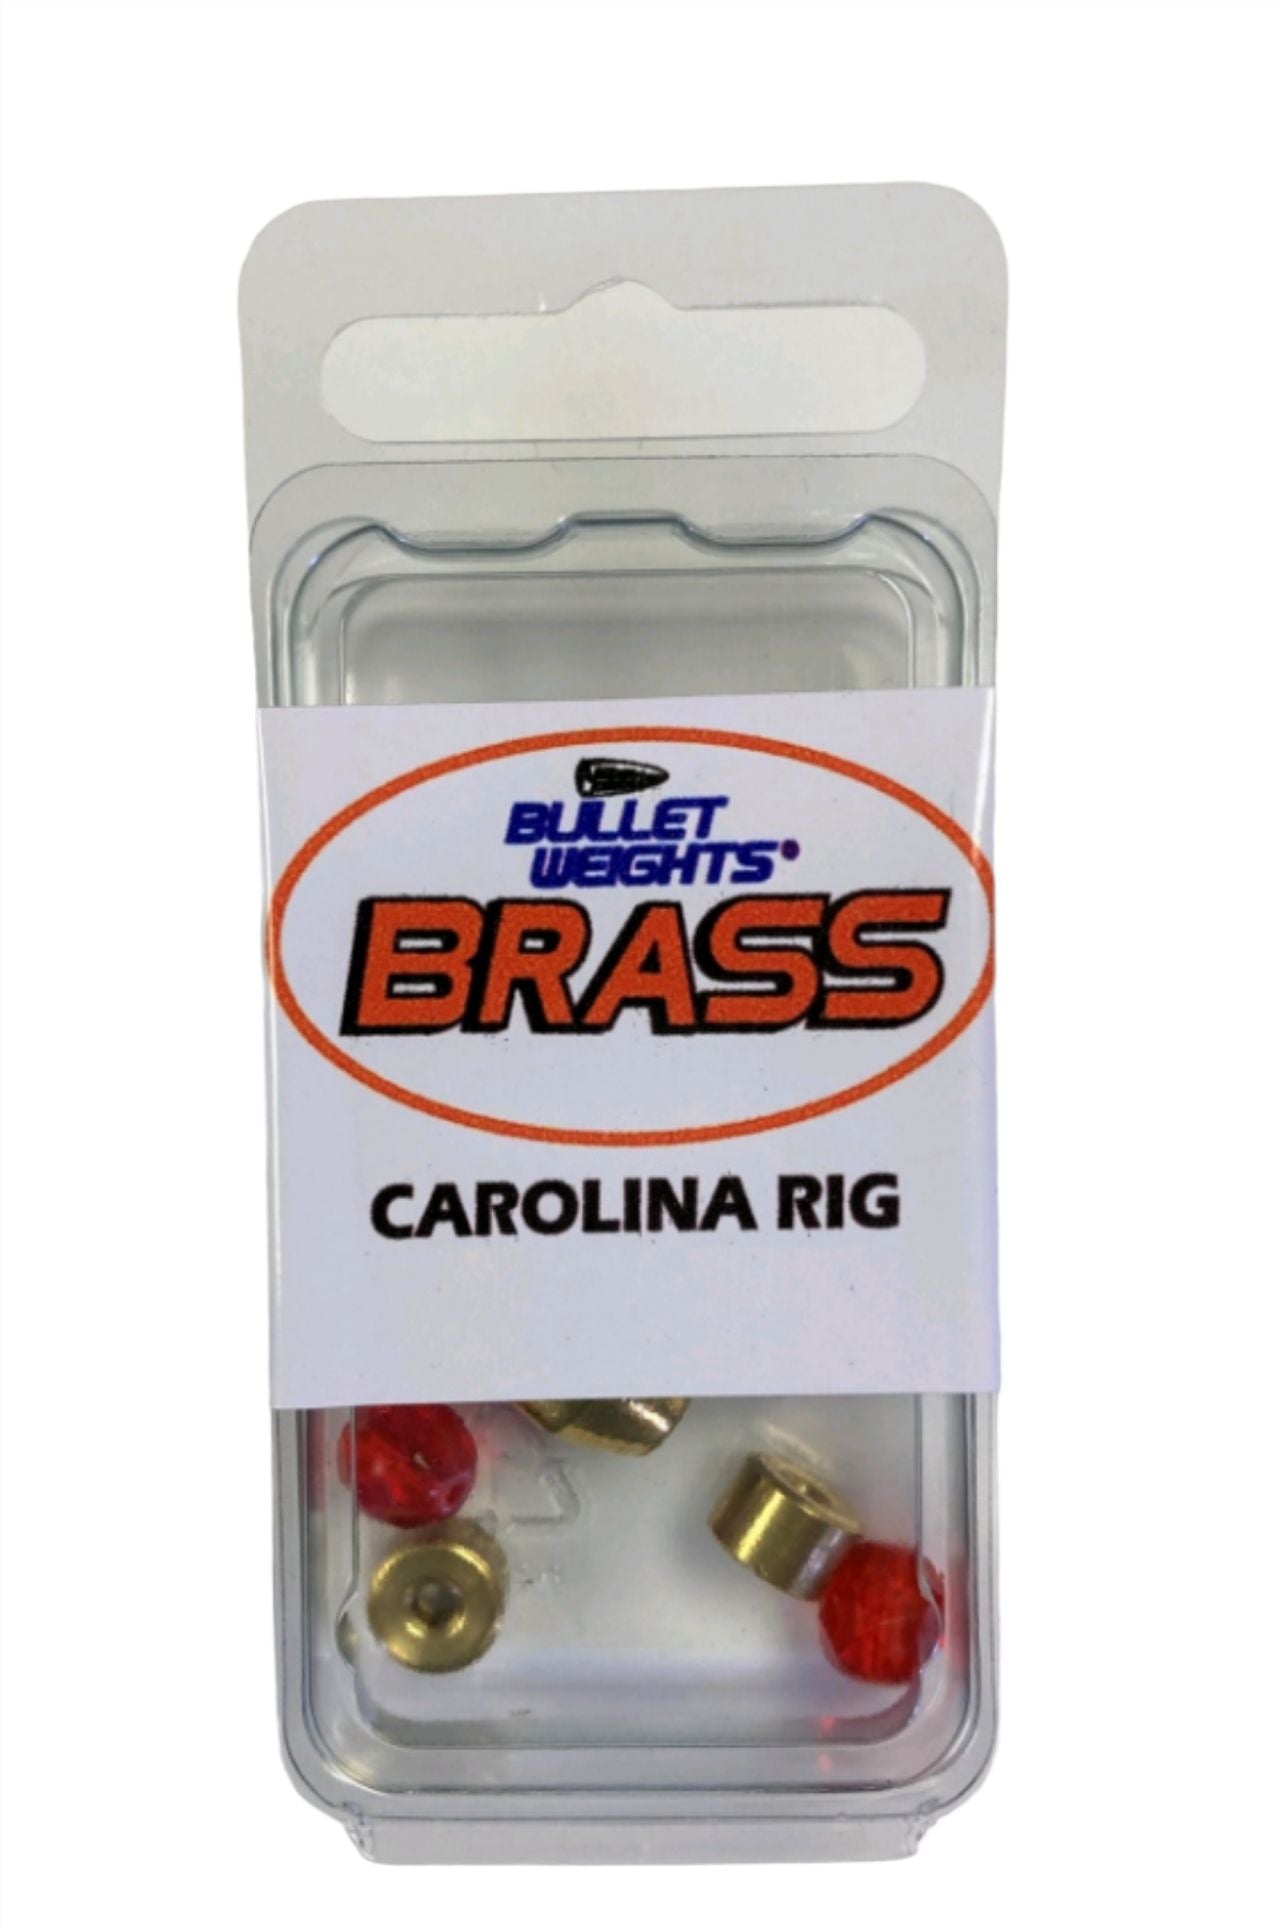 Bullet Weights® PBCWR12 RED Brass Carolina Rig Kit, 6 Pieces Fishing Weights  